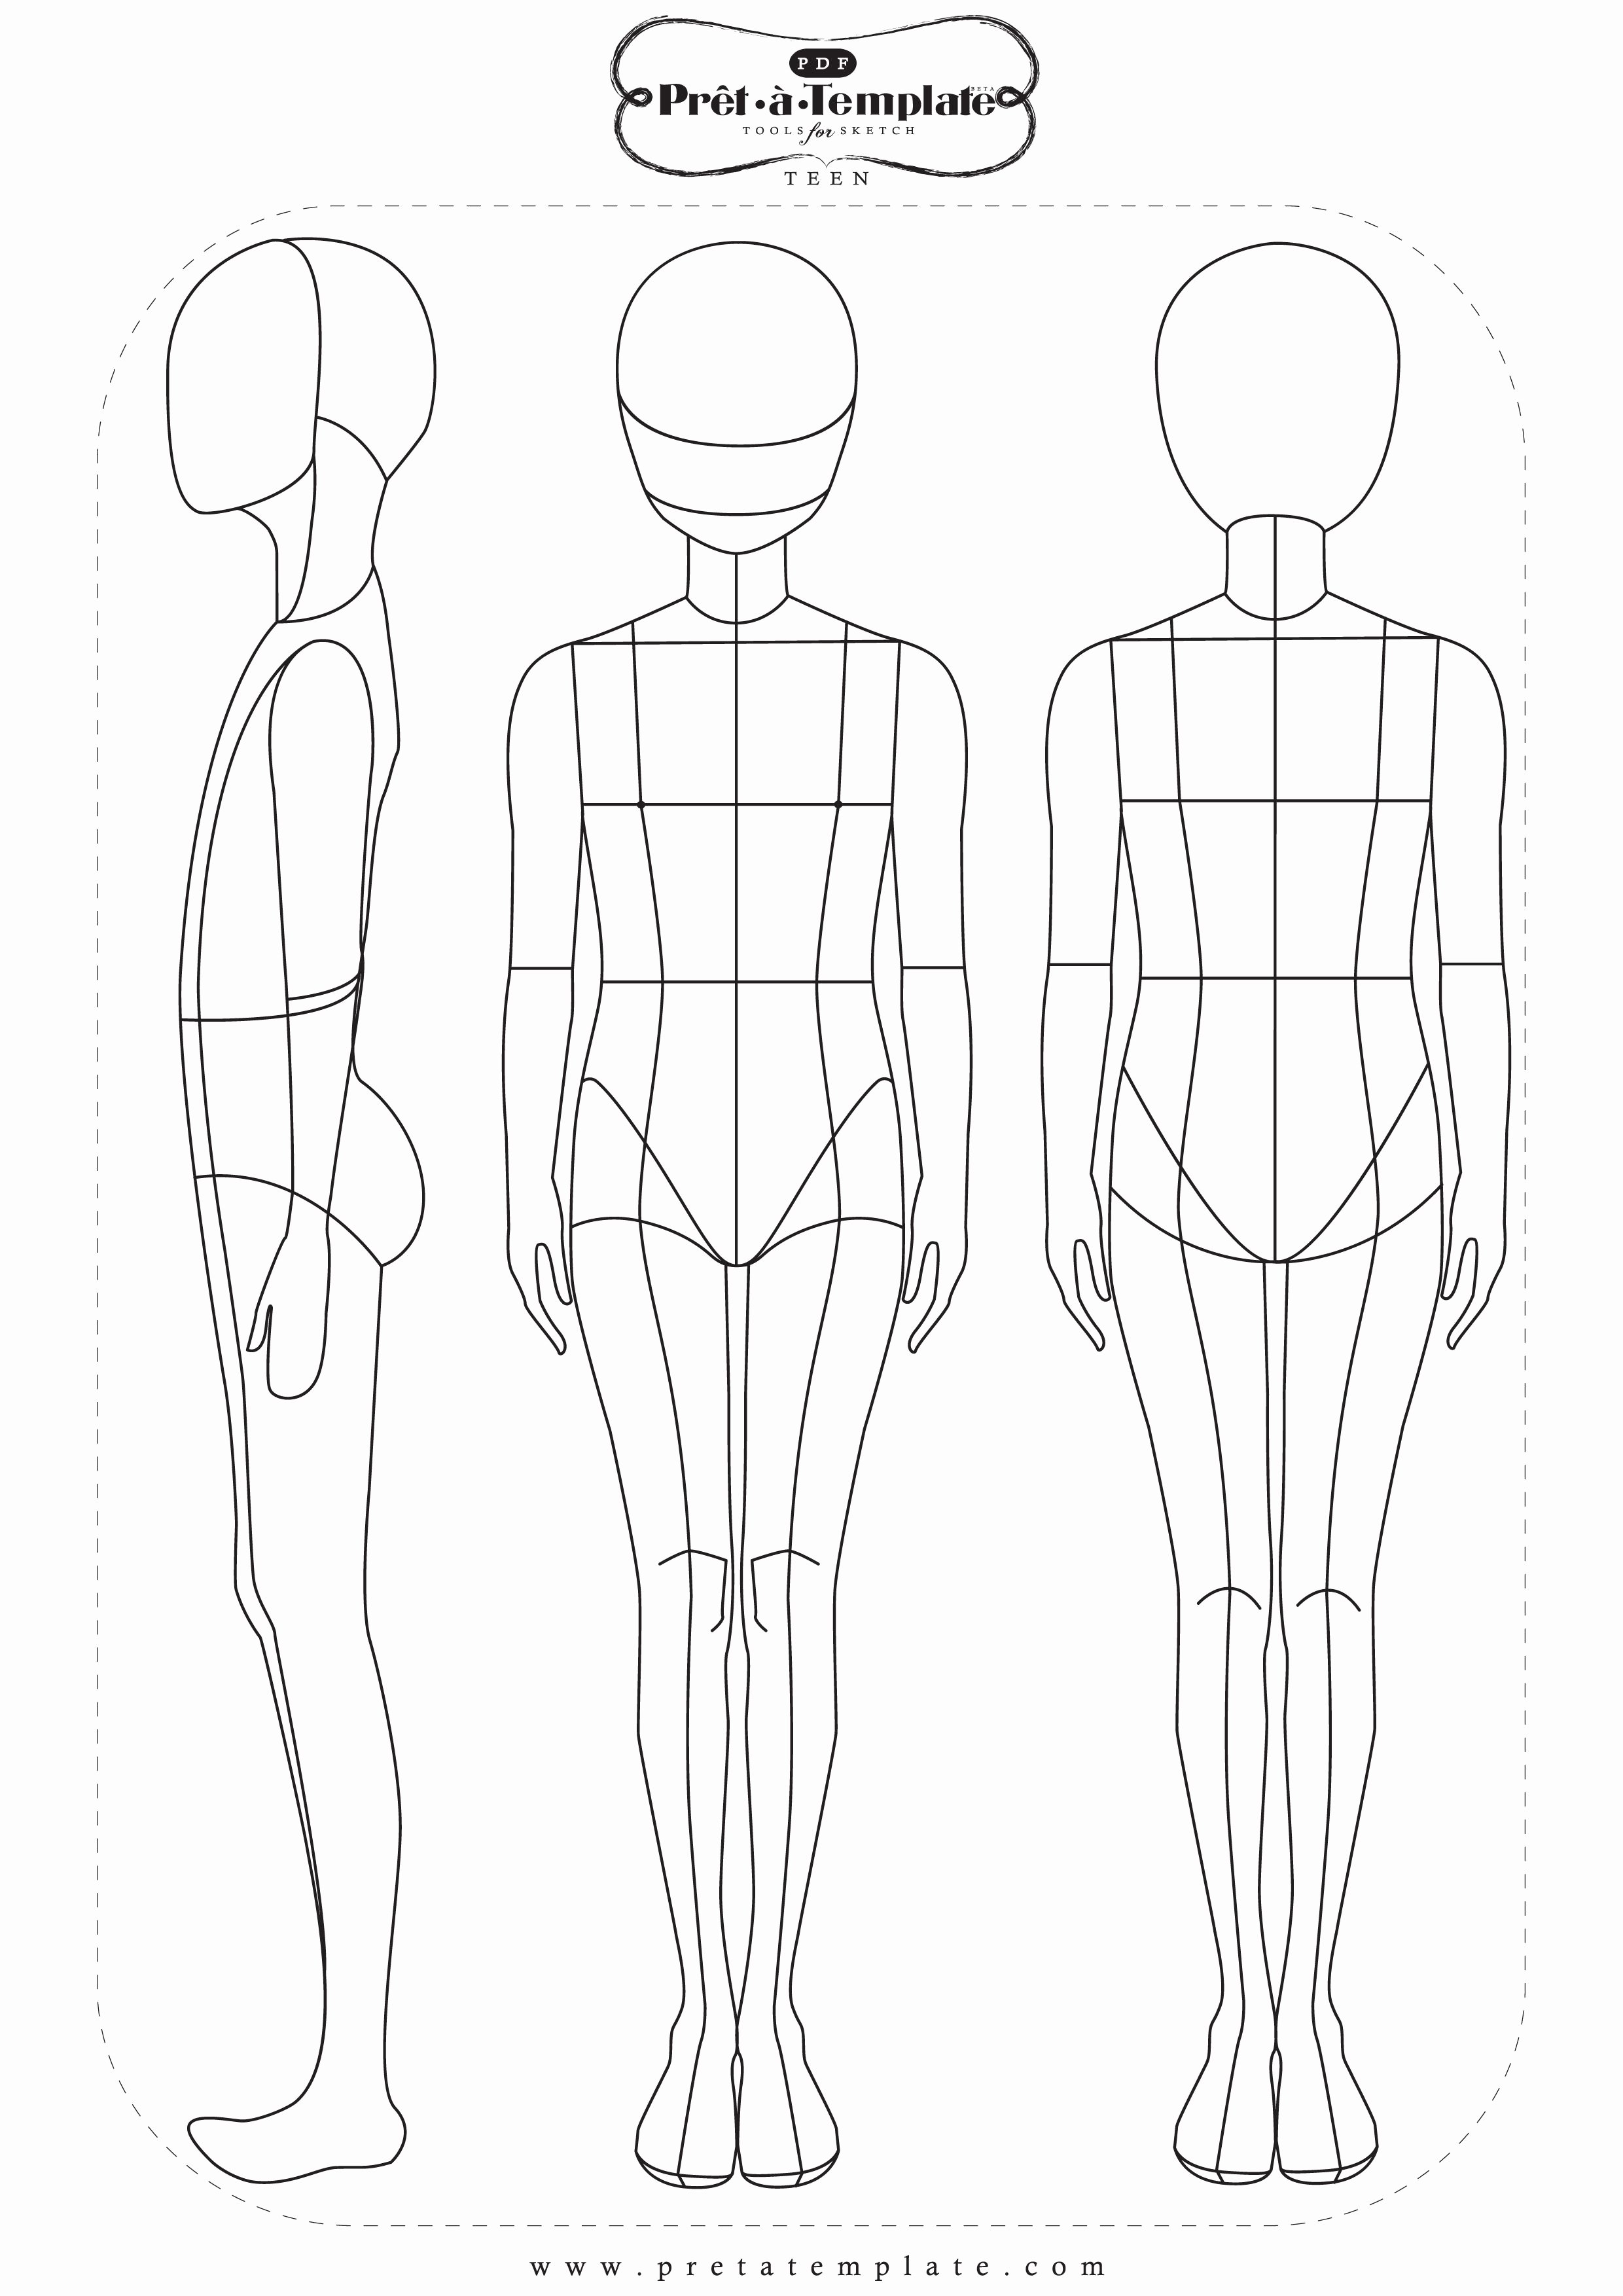 Body Drawing Template Beautiful Fashion Templates Fashion App Pret à Template Available